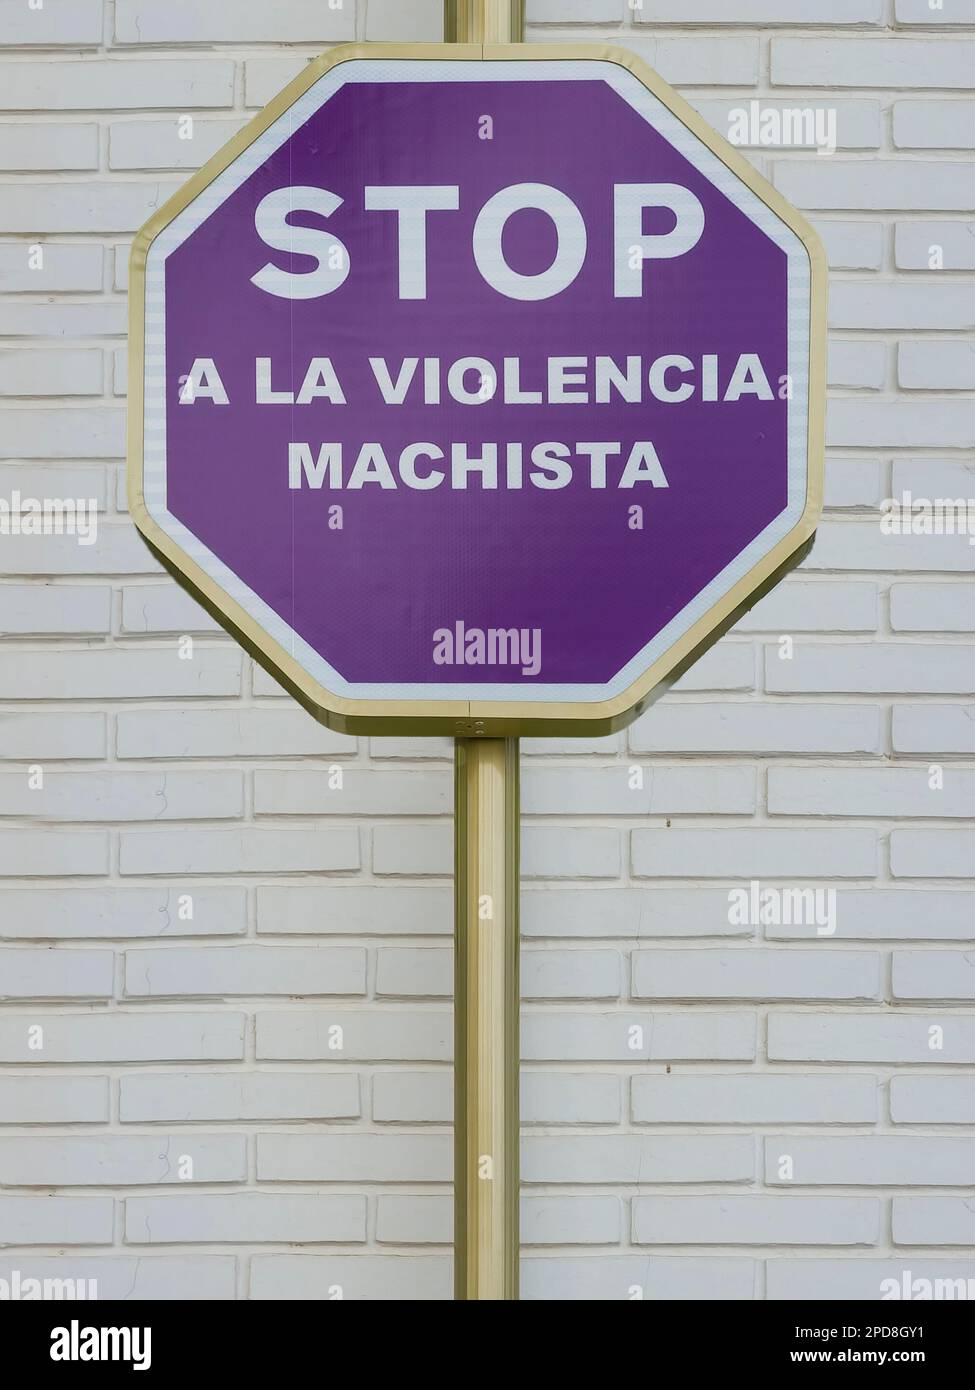 Stop sign with purple background and the message written in Spanish stop violence against women (Stop a la violencia machista) Stock Photo